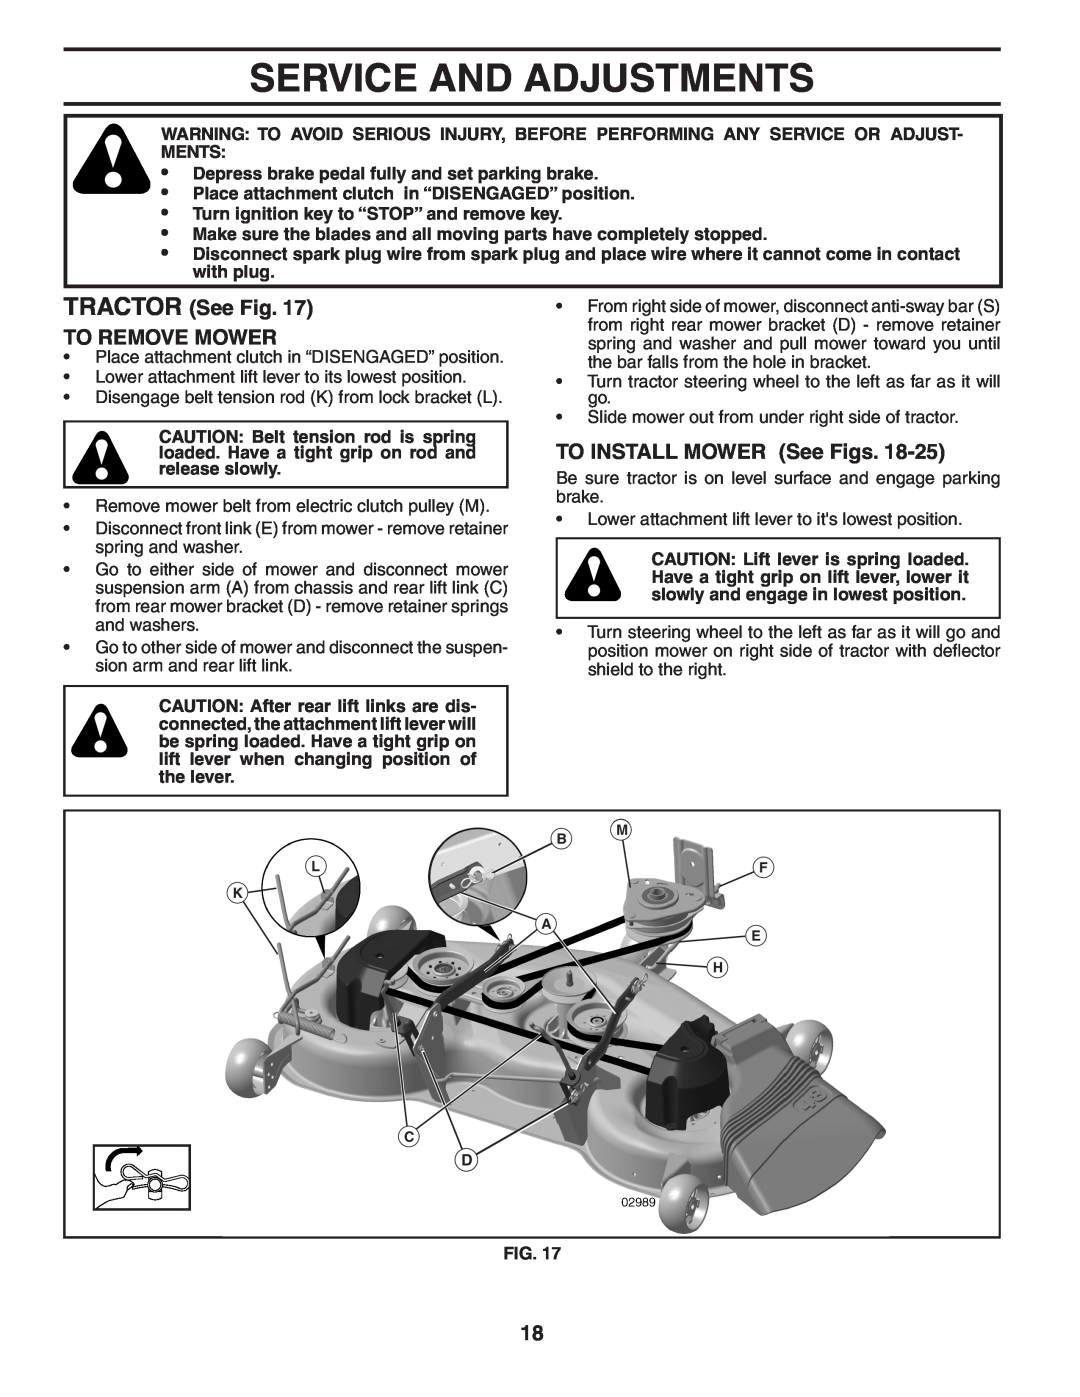 Poulan 404402, 960420022 manual Service And Adjustments, TRACTOR See Fig. TO REMOVE MOWER, TO INSTALL MOWER See Figs 